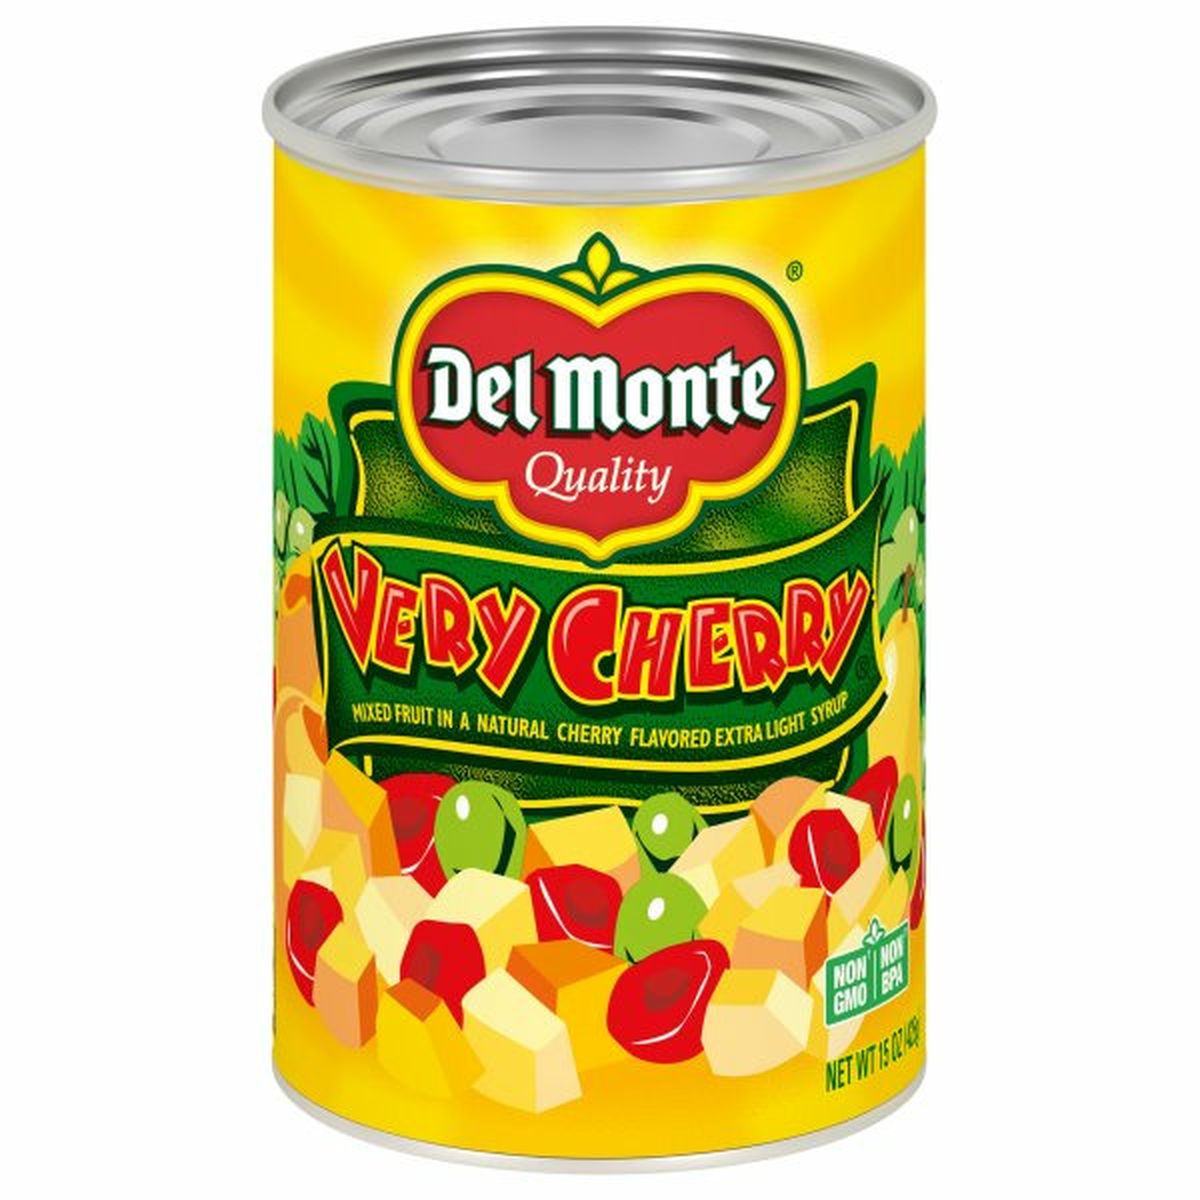 Calories in Del Monte Mixed Fruit, Very Cherry